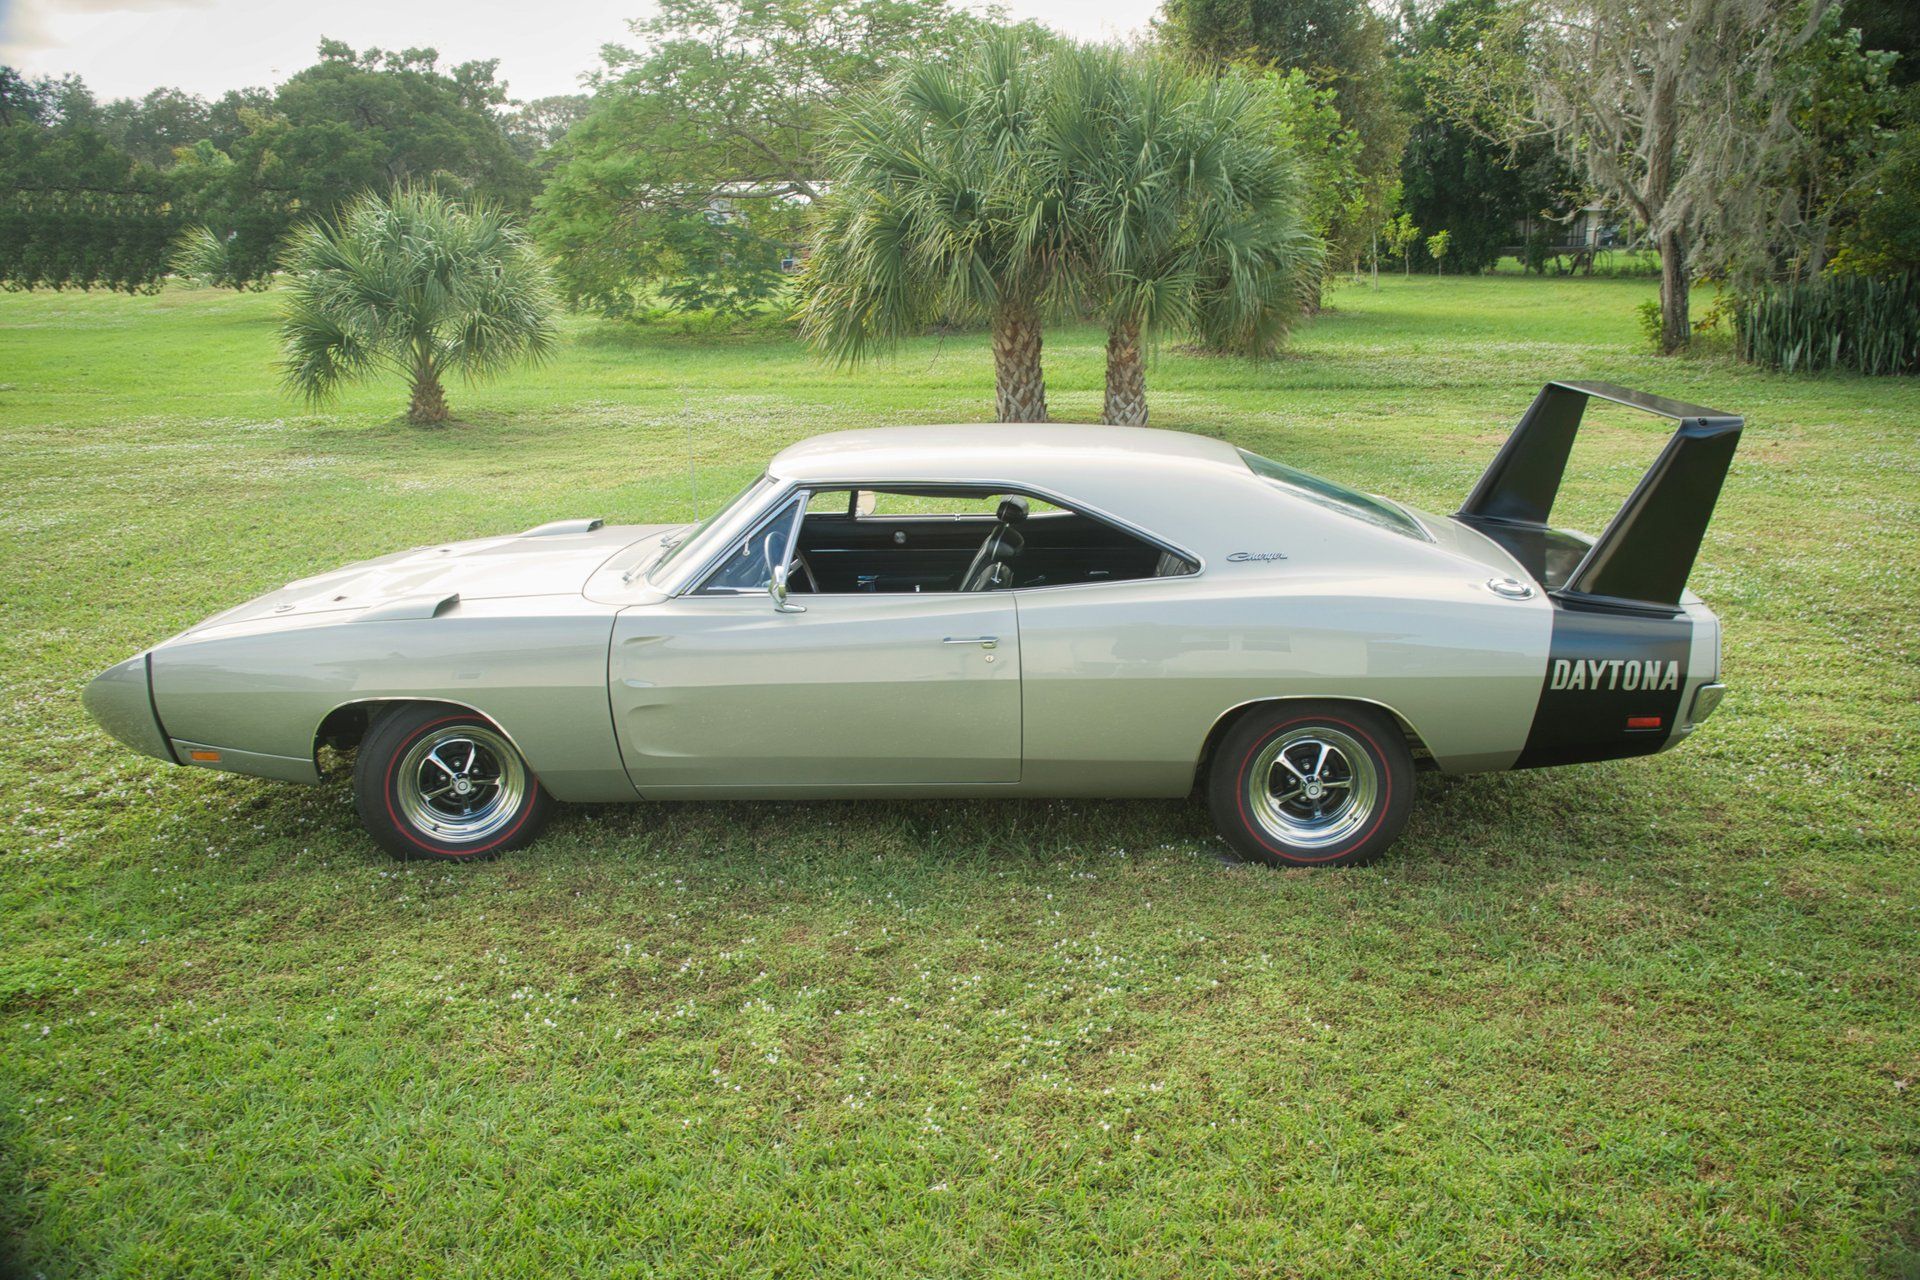 Dodge Charger Daytona Is A Winged Warrior